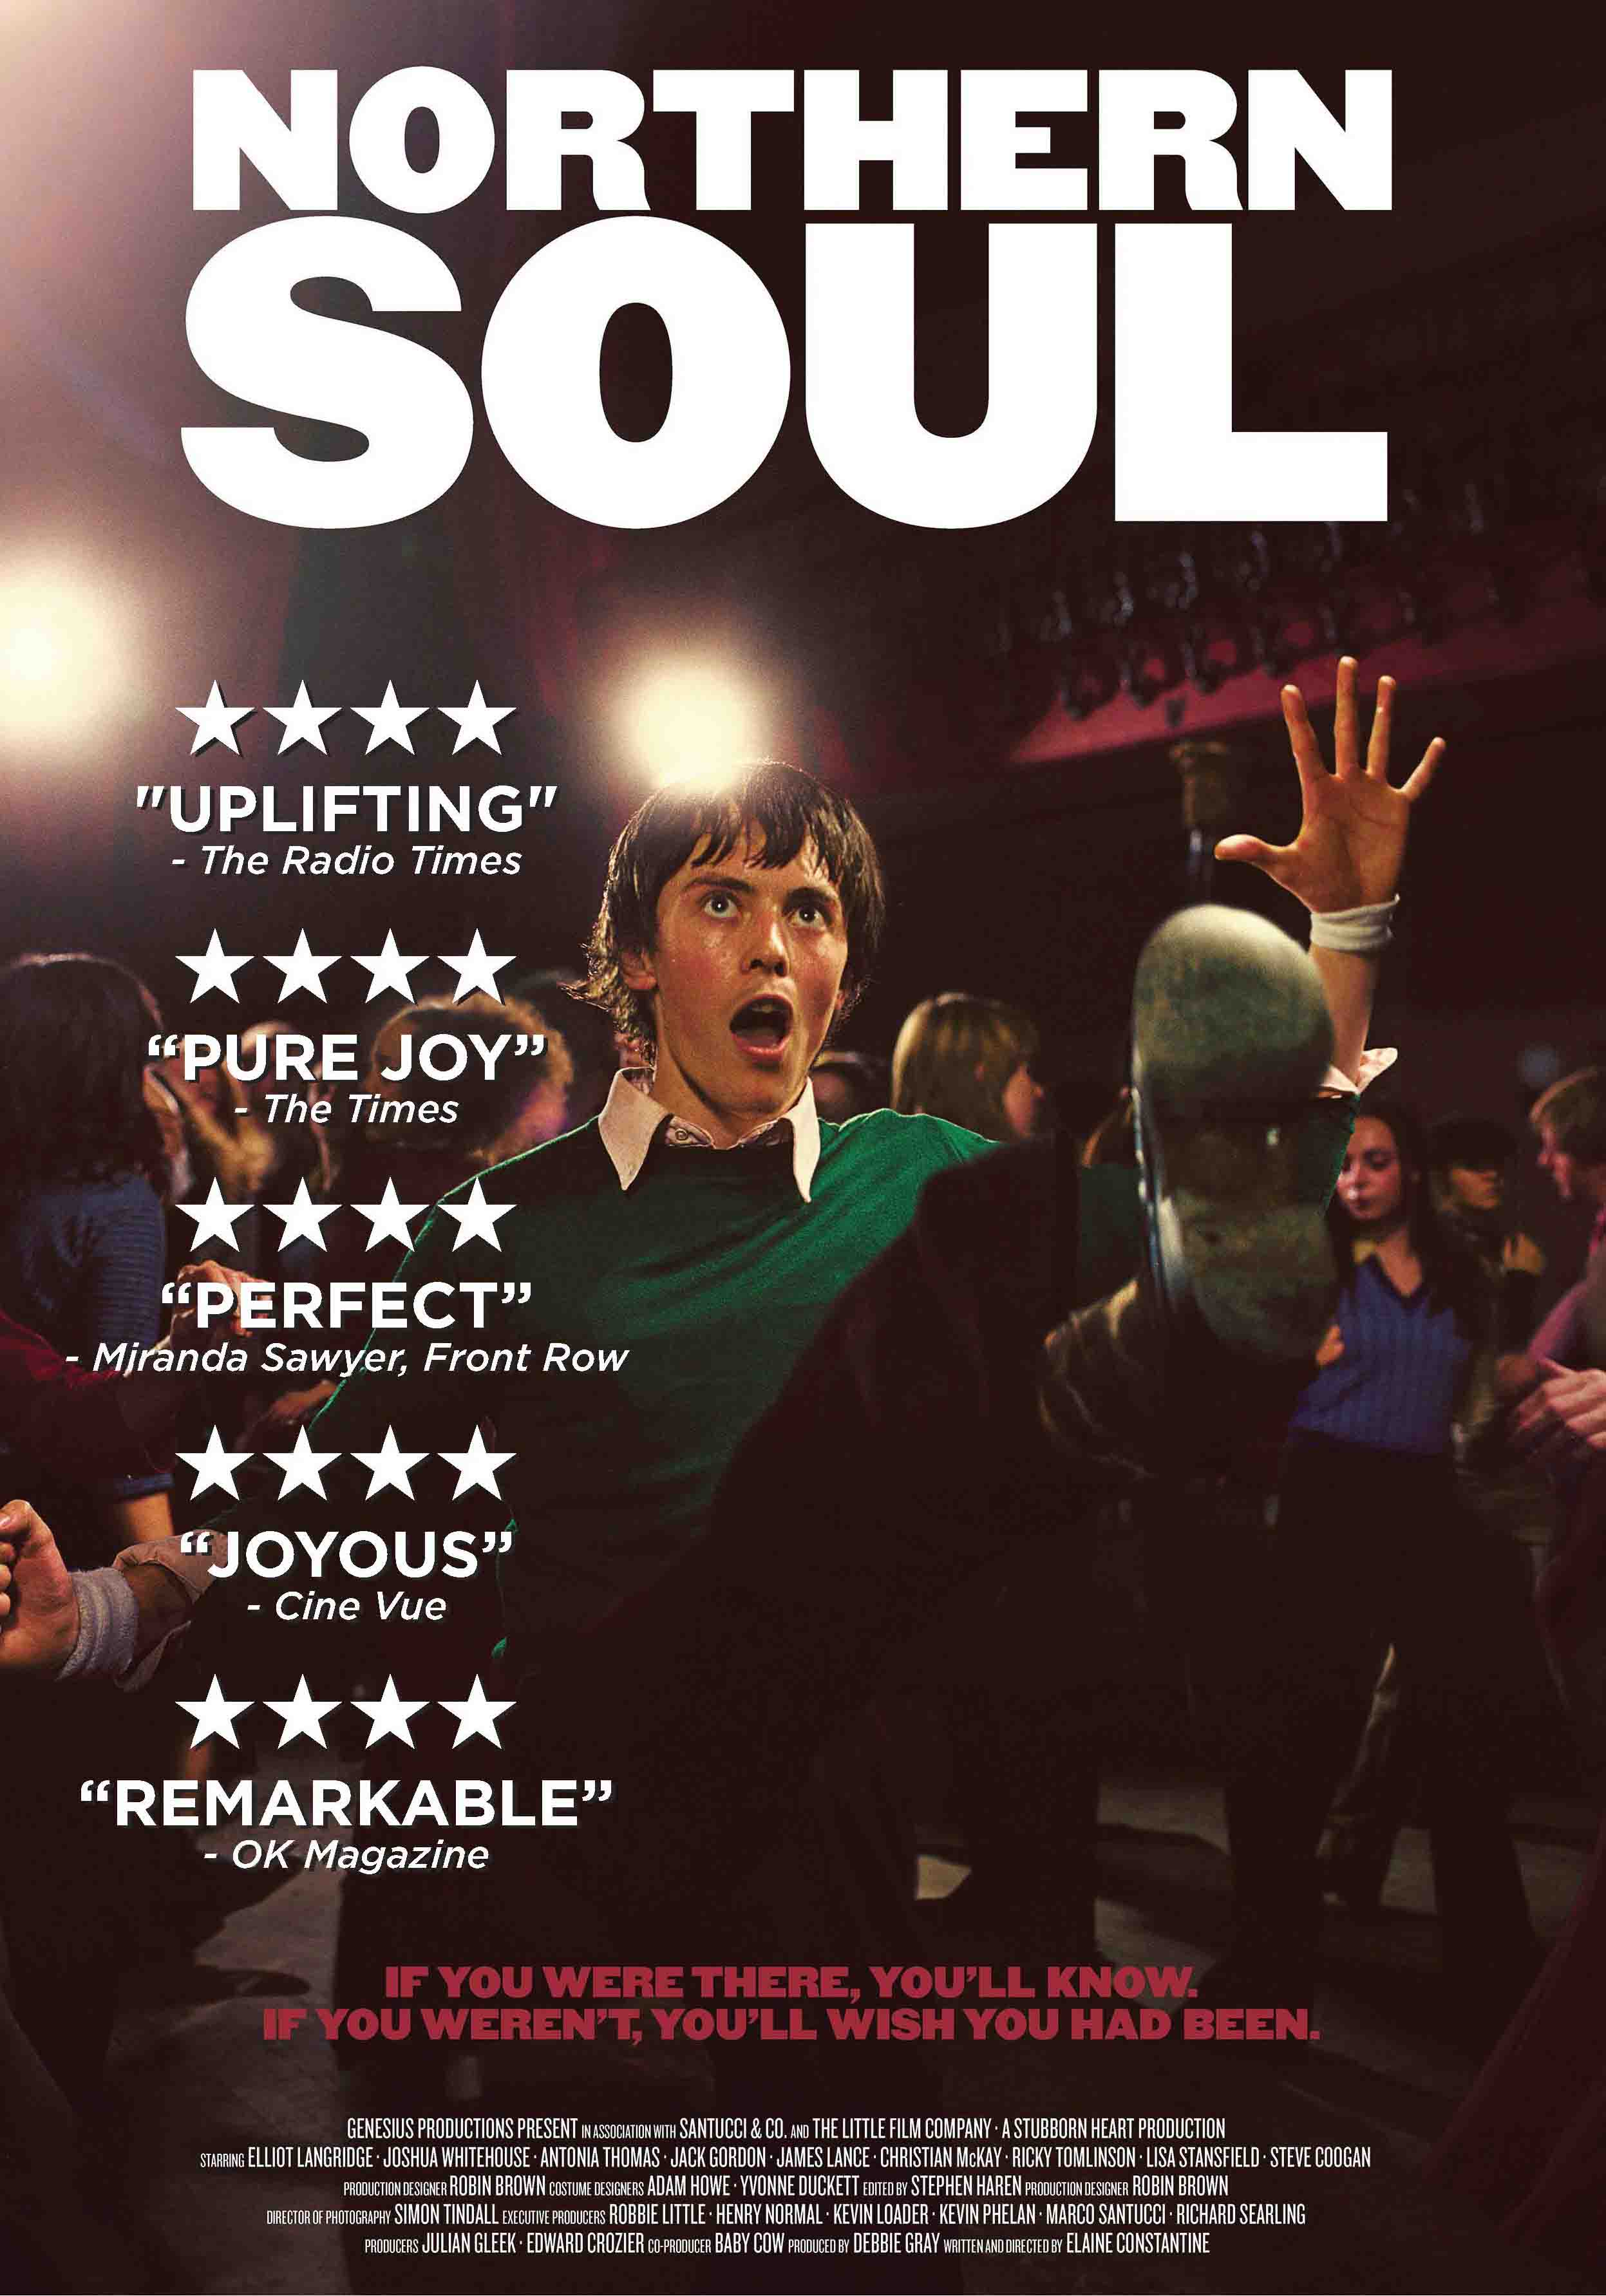 Northern Soul by Elaine Constantine